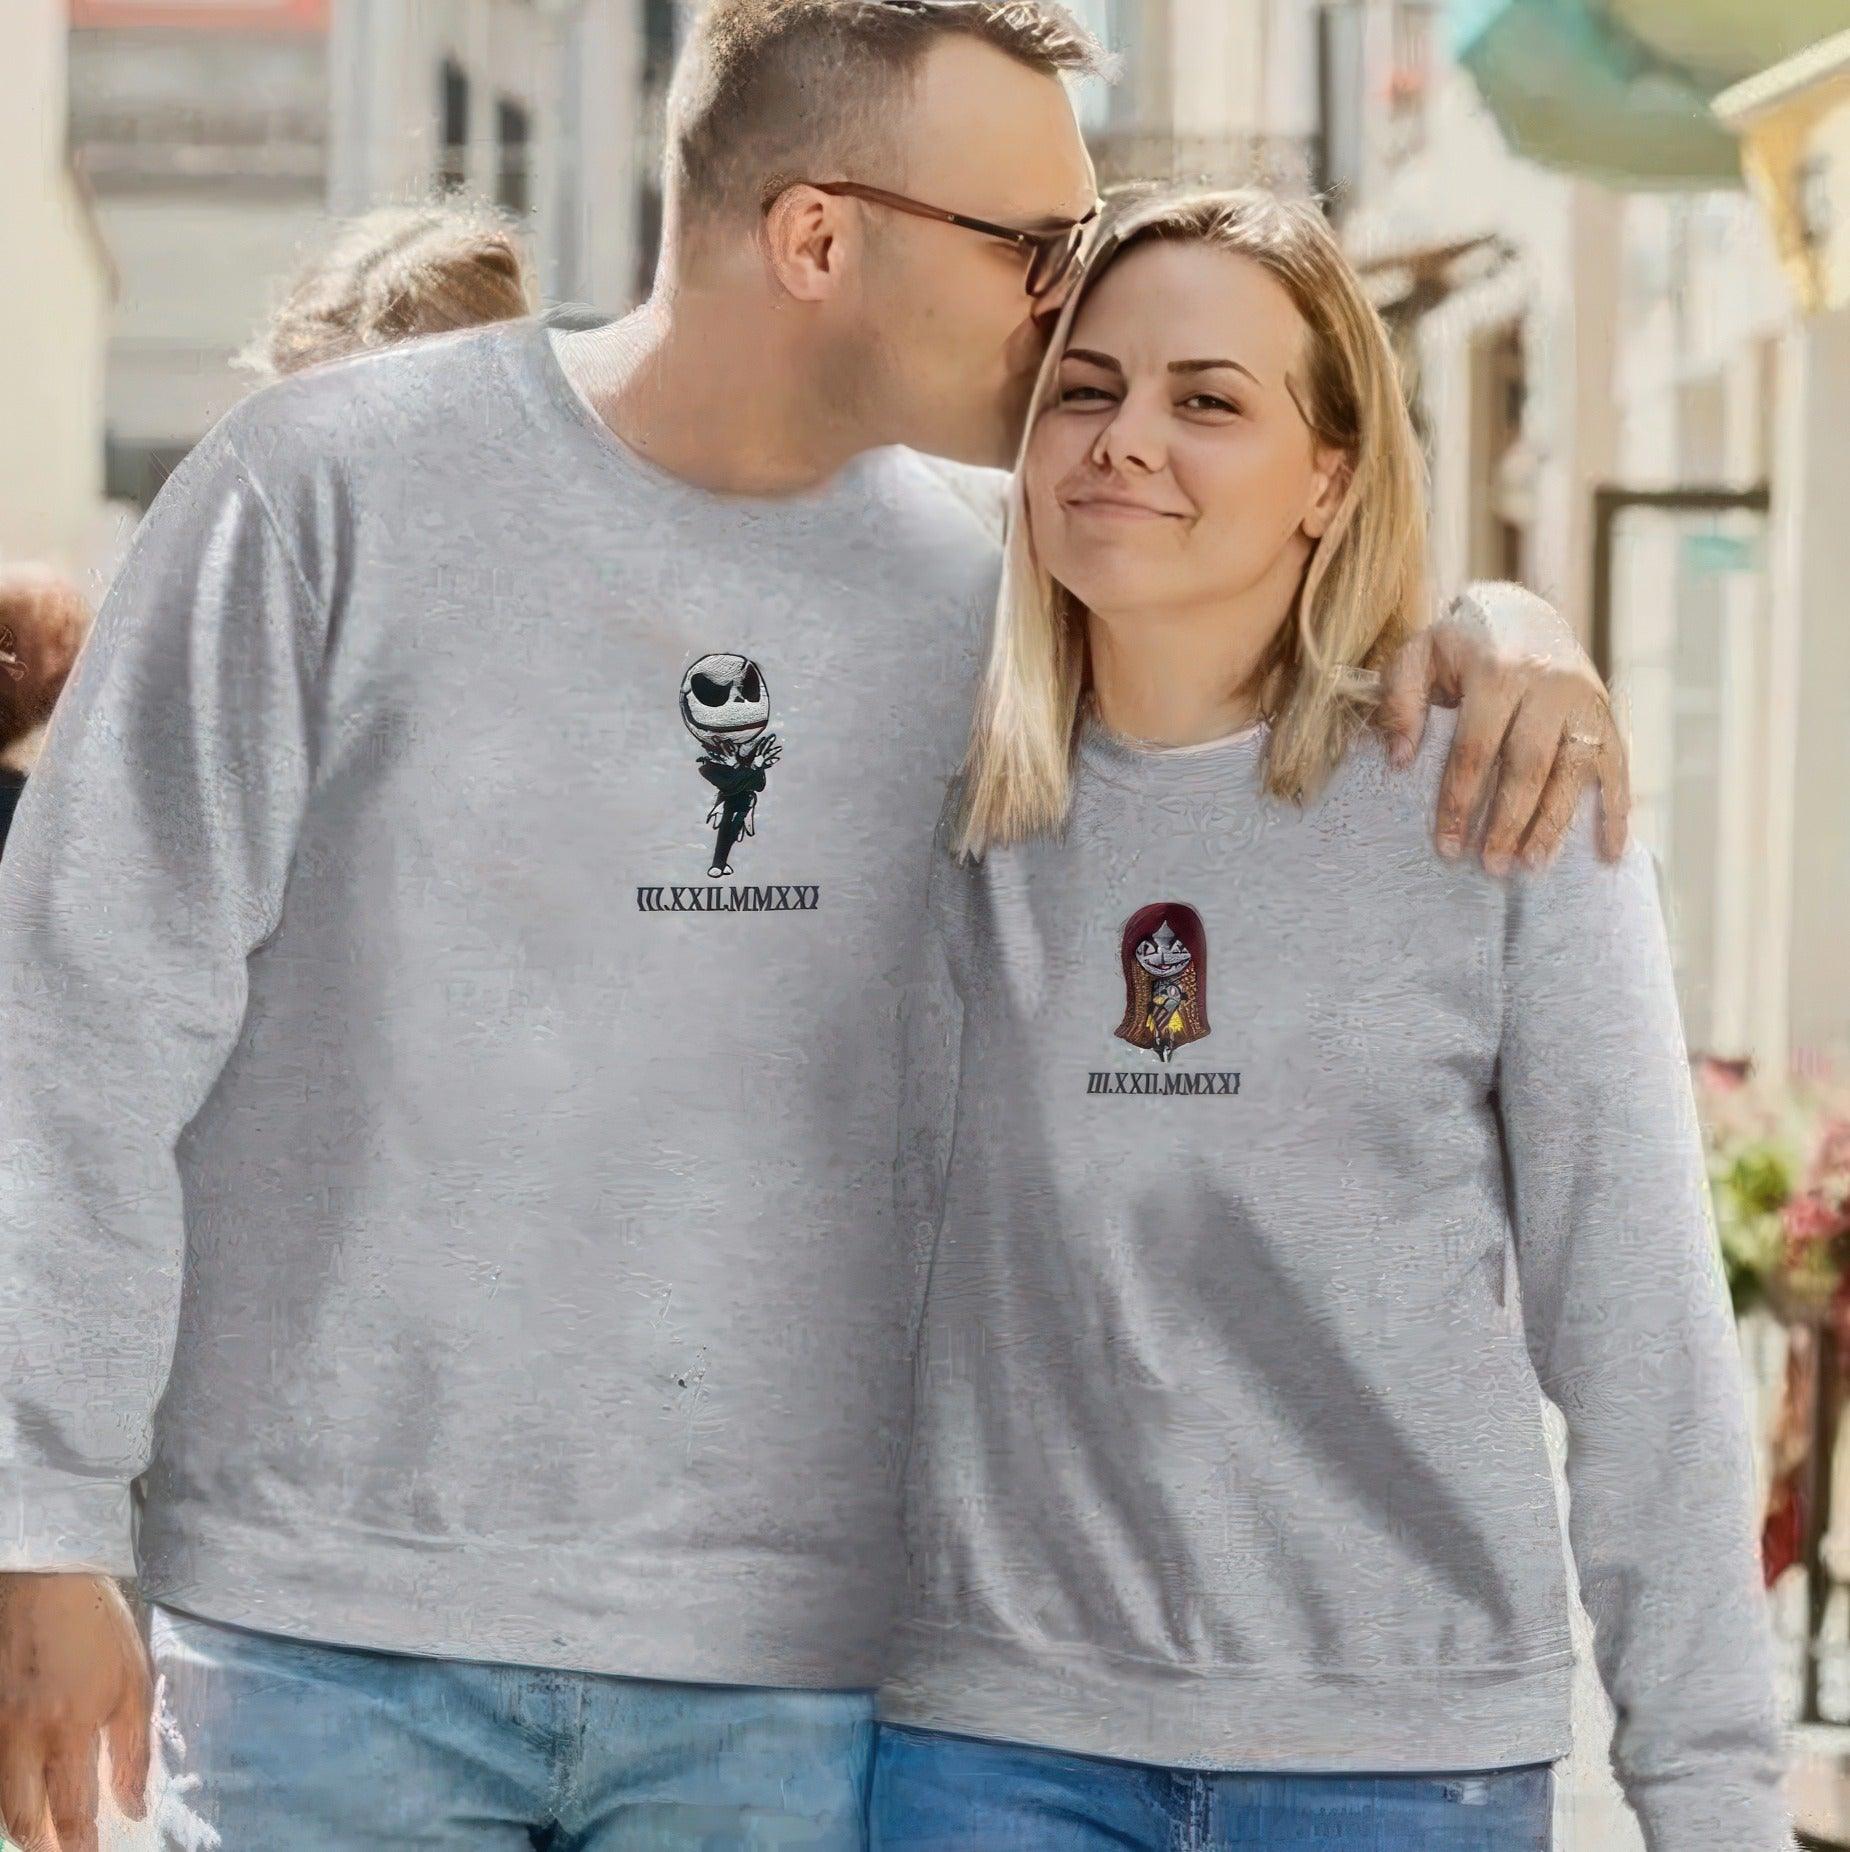 Custom Embroidered Sweatshirts For Couples, Matching Sweatshirts For Couples With Names, Jack Couples Embroidered Sweatshirt